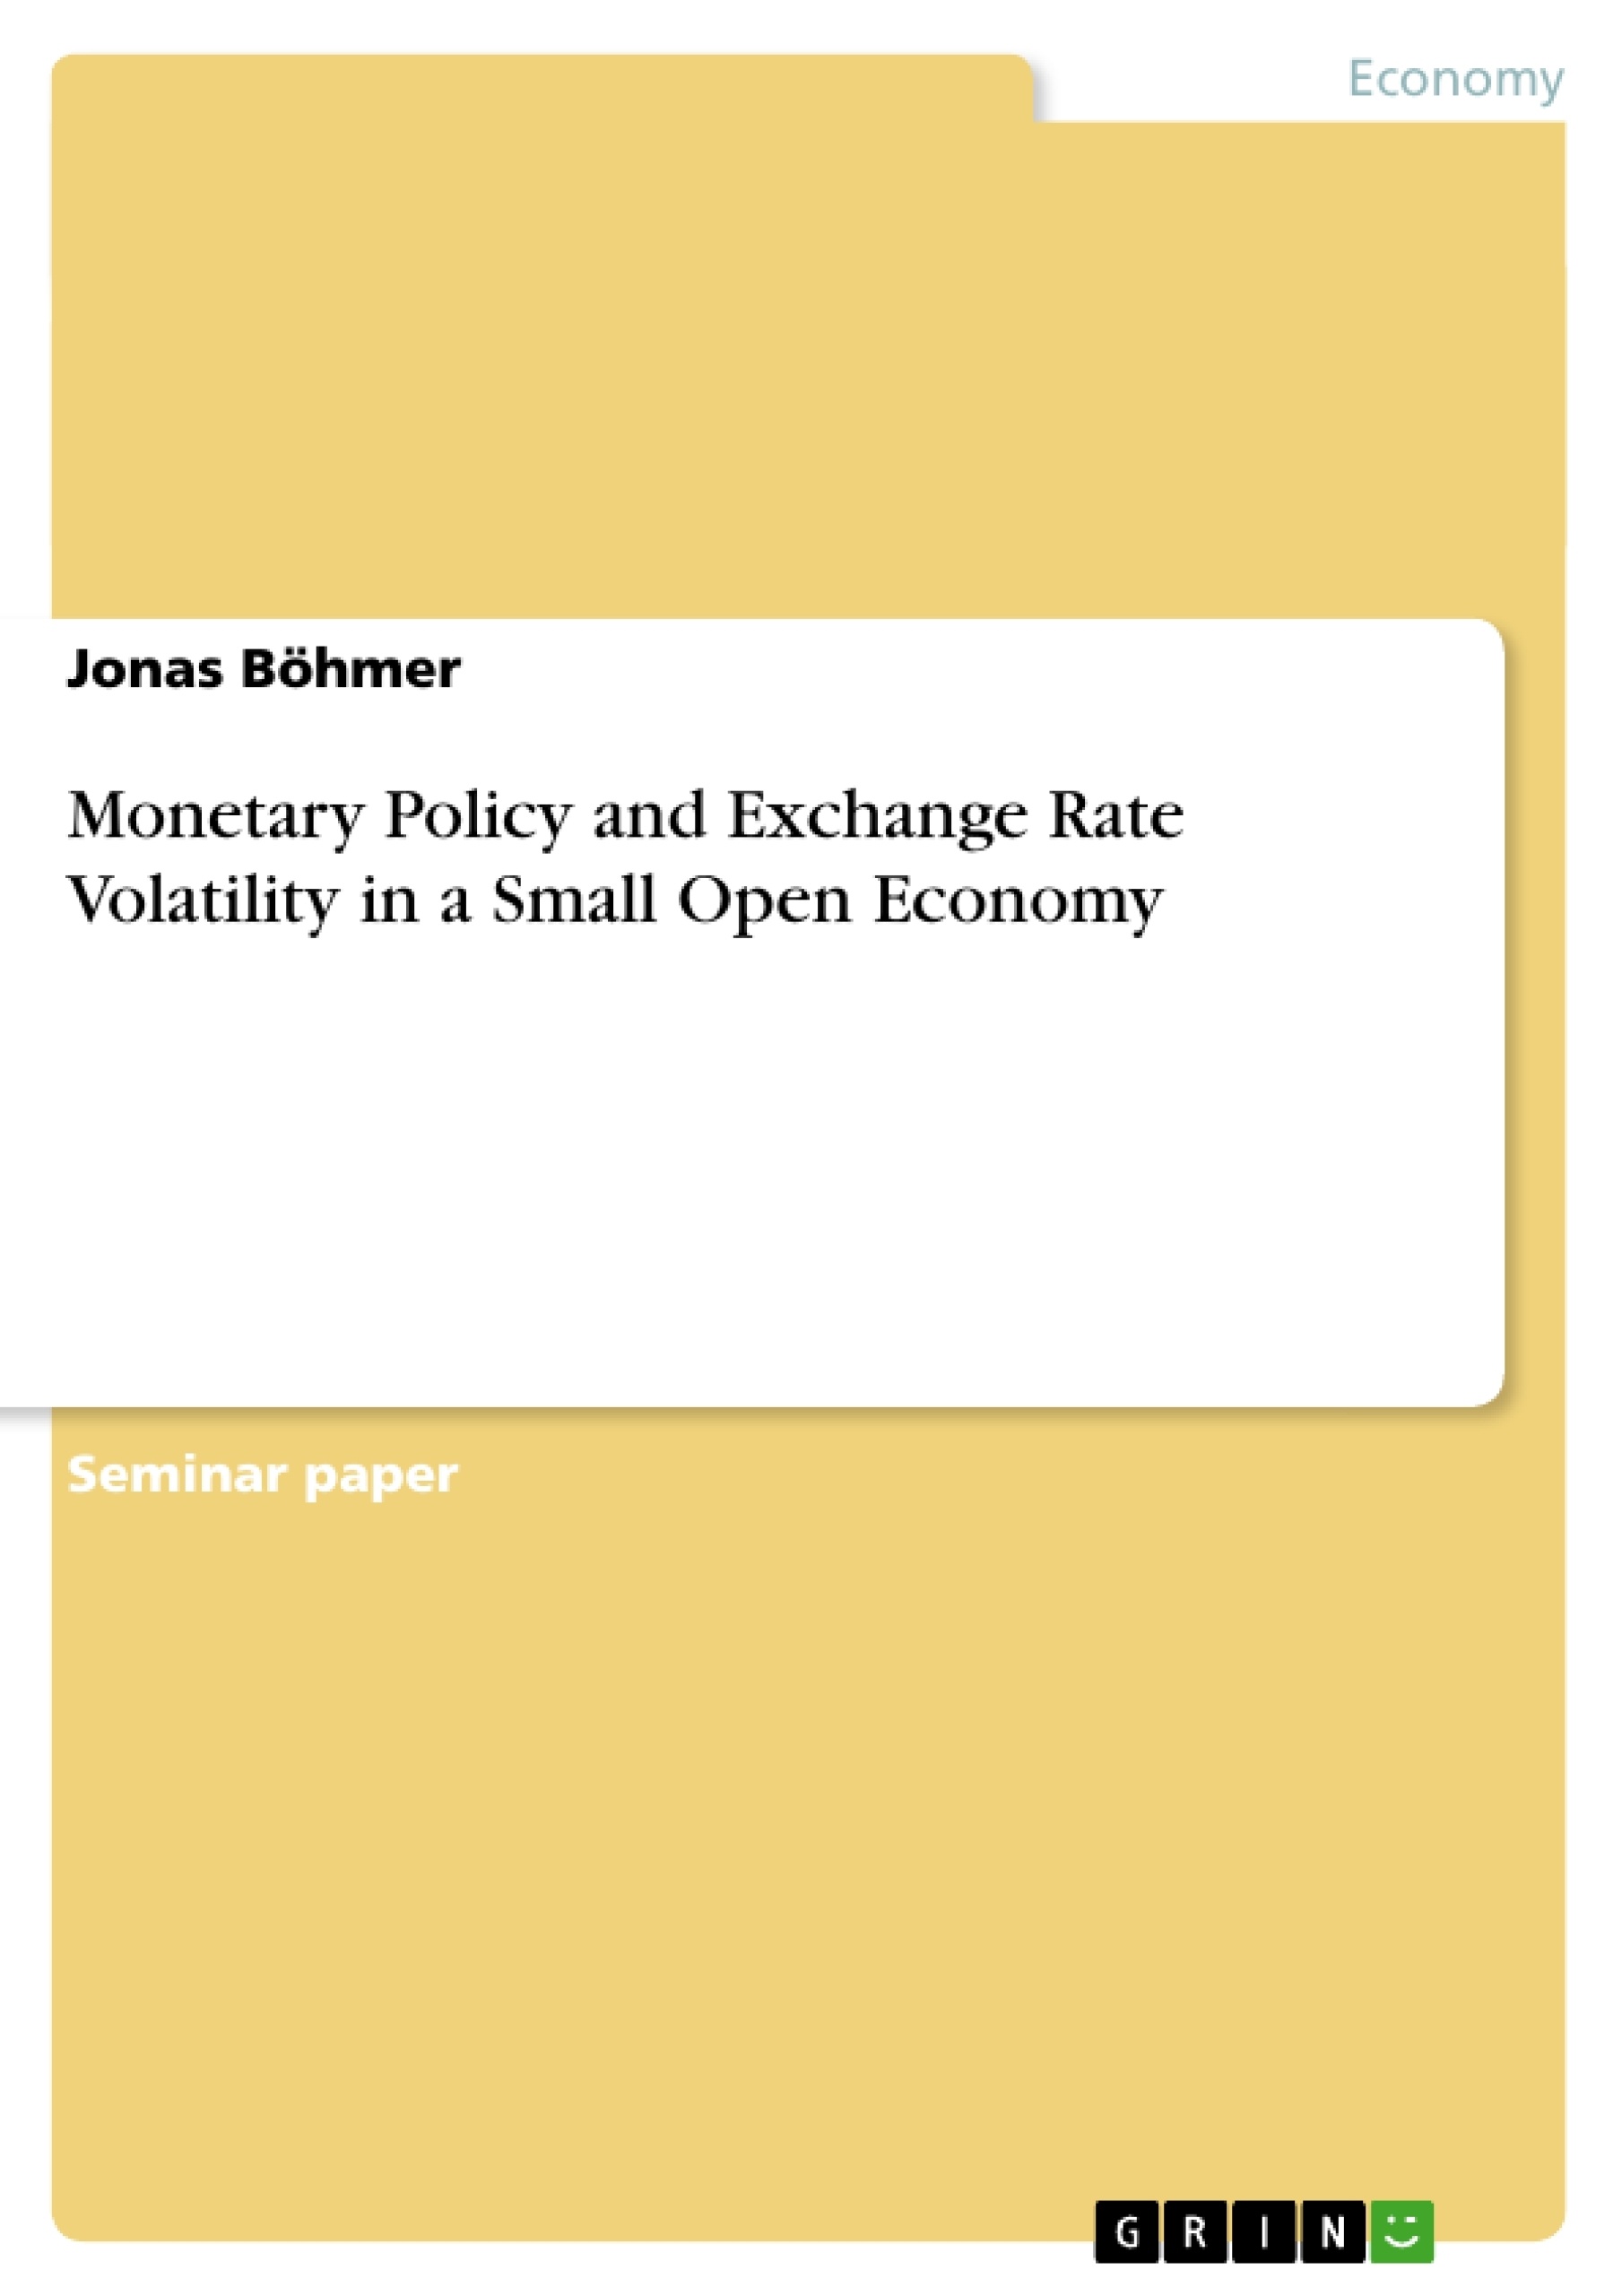 Titel: Monetary Policy and Exchange Rate Volatility in a Small Open Economy